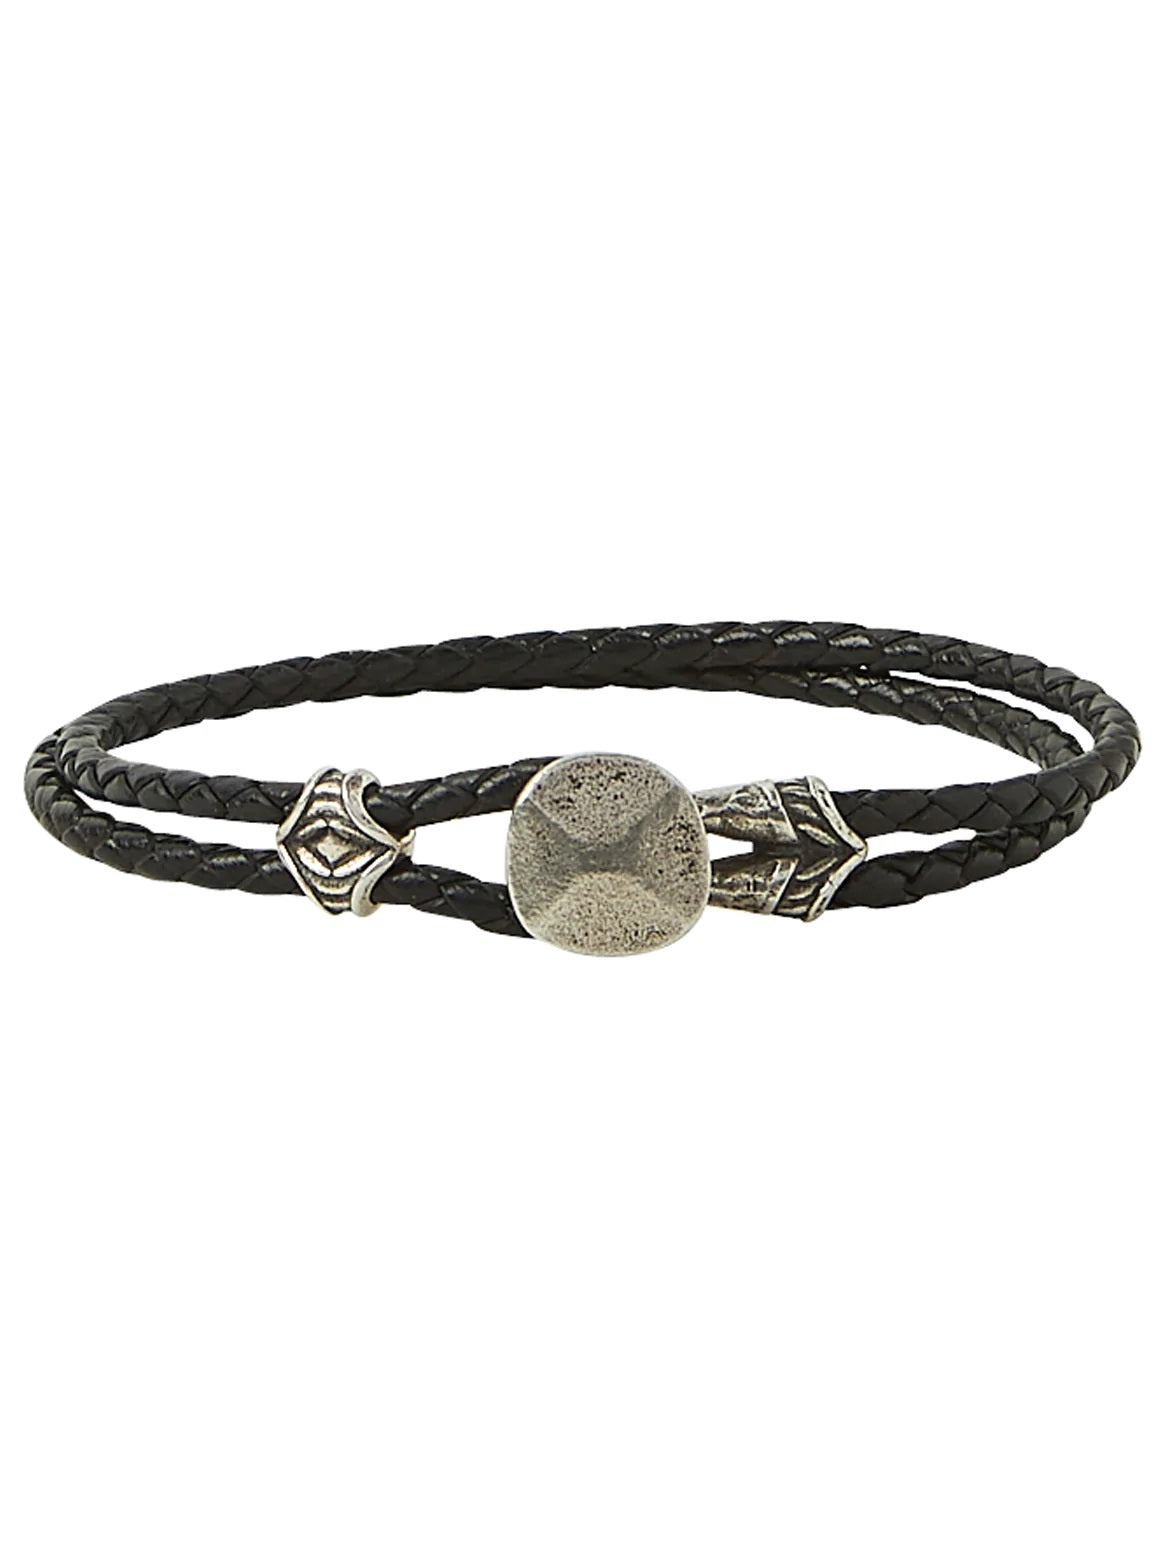 RIVET STERLING SILVER LEATHER BRACELET, BRAIDED, WITH NO STONE